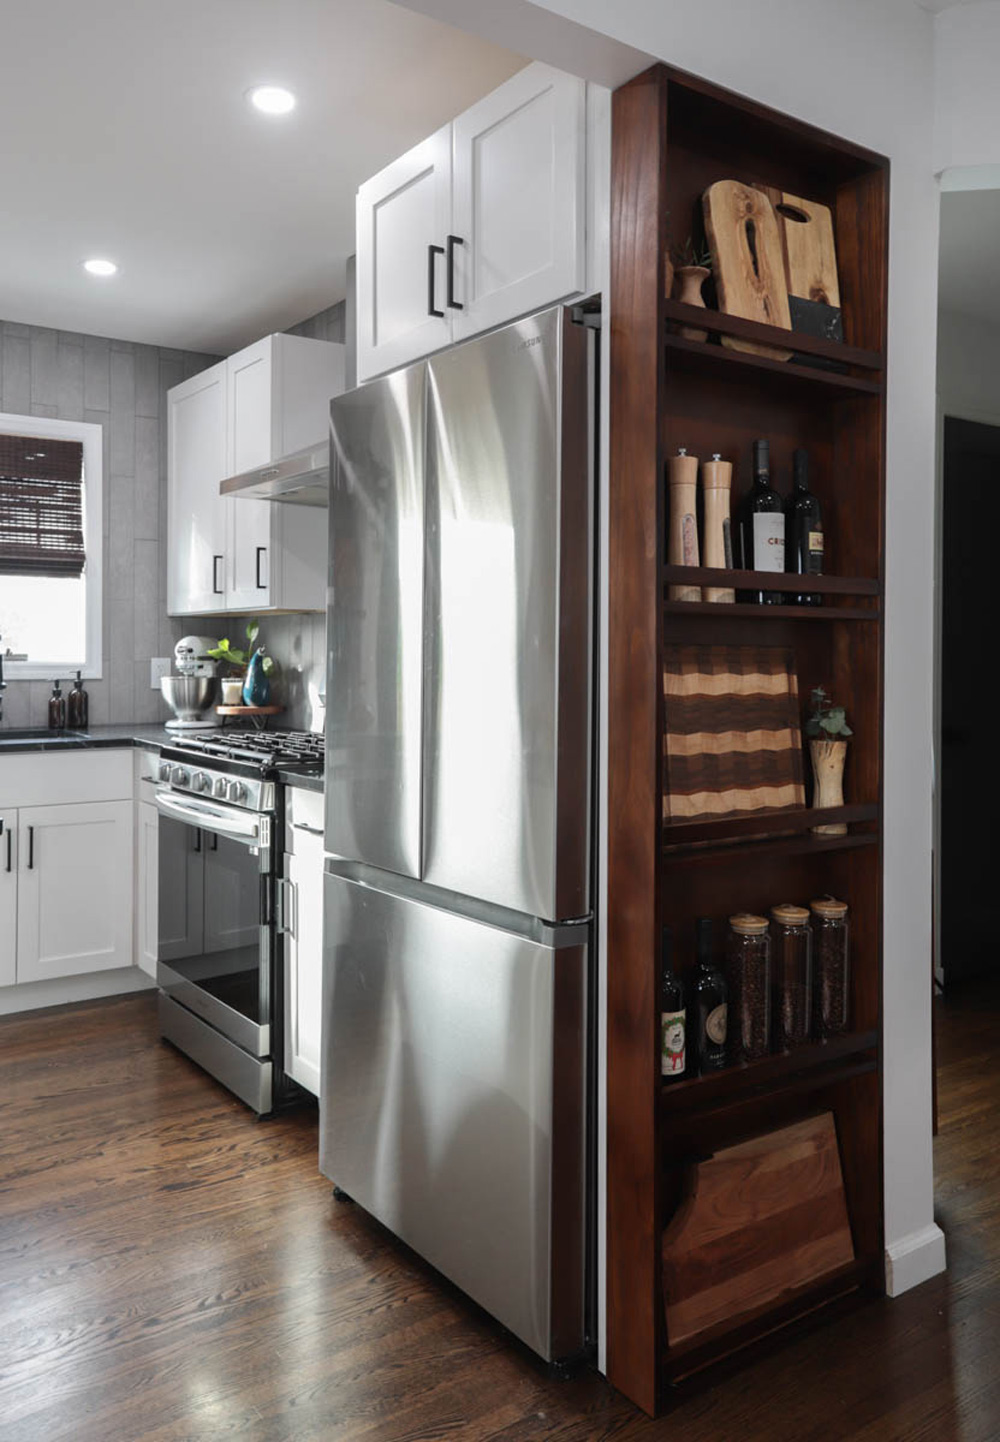 Refrigerator with a stocked, wooden shelved rack on the side.